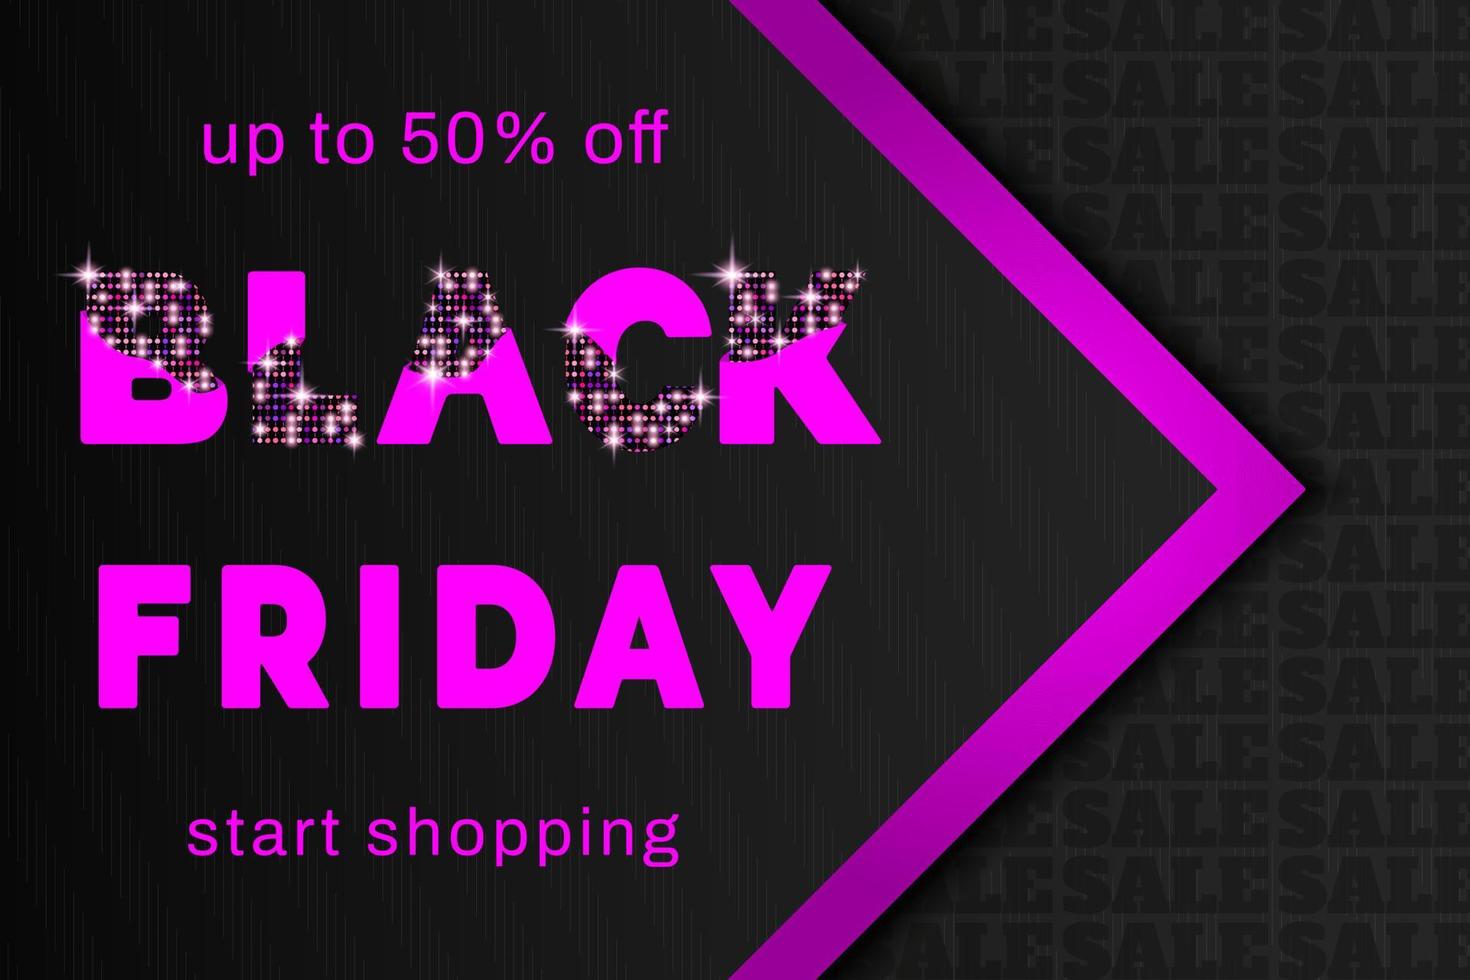 Black friday sale. Black friday banner. Discount offer price sign. Friday sale. Pink  bright glowing text with arrow on black background. Luxury Vector